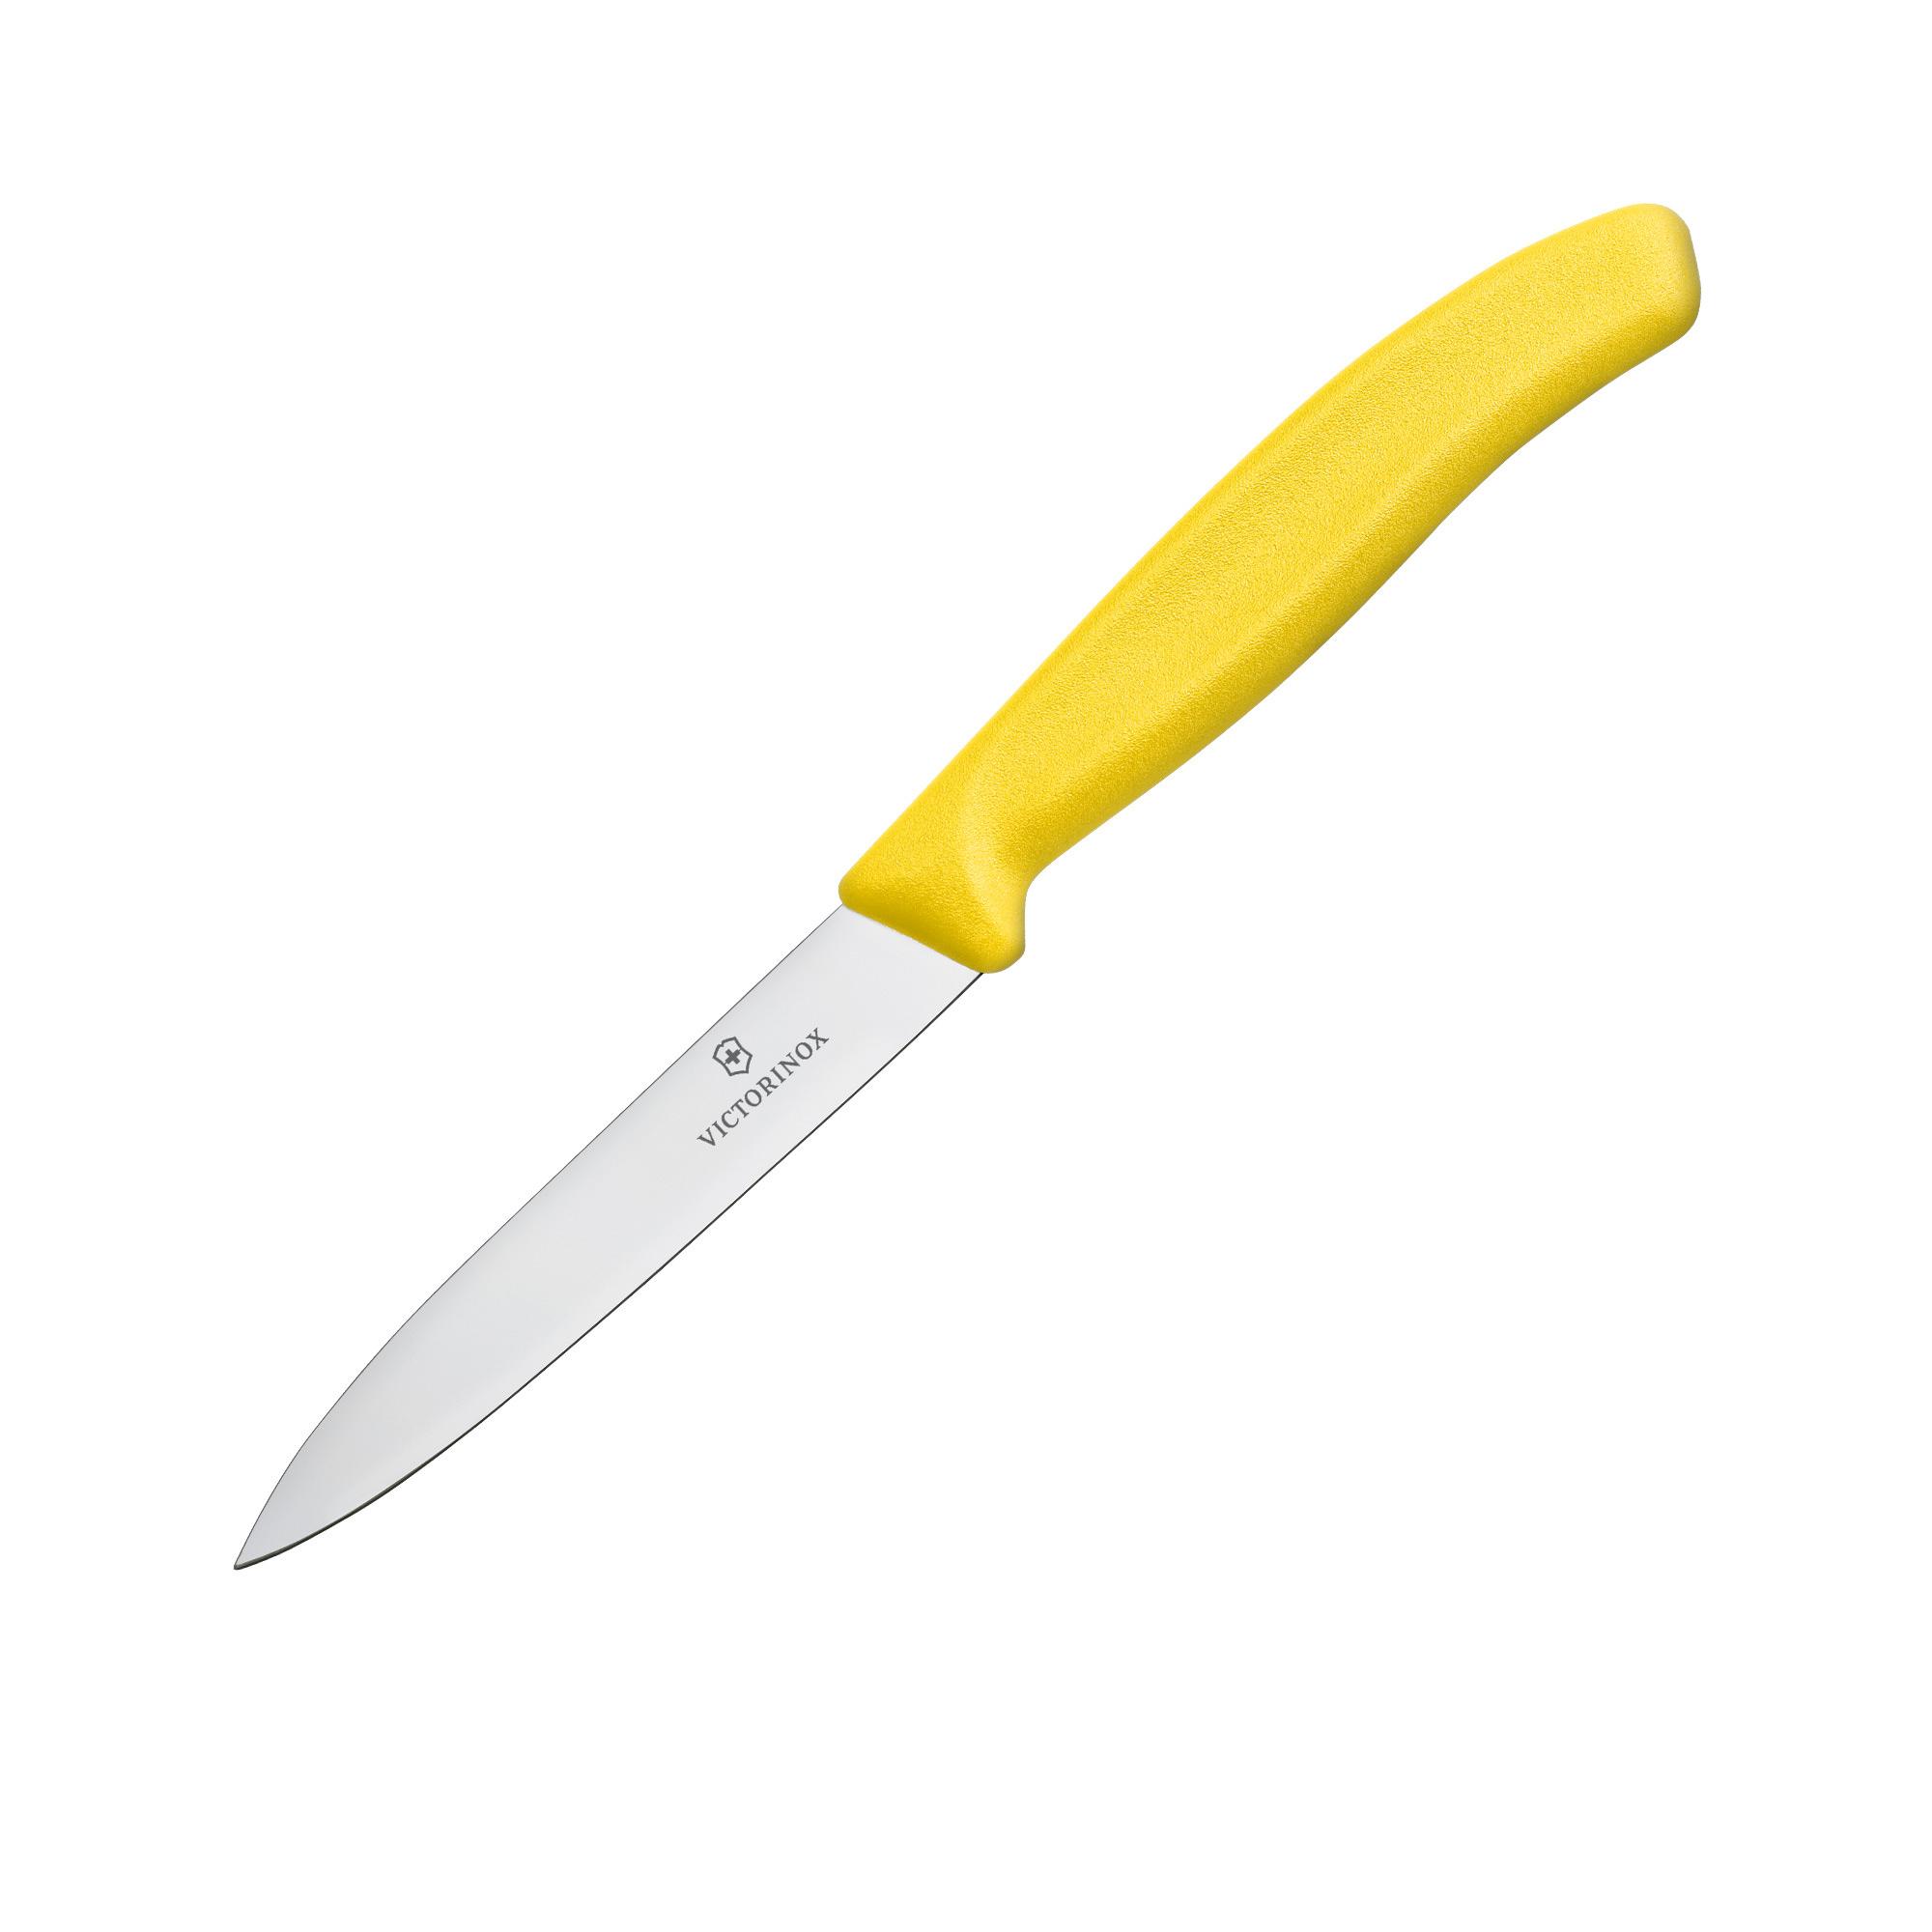 Victorinox Swiss Classic Pointed Tip Vegetable Knife 10cm Yellow Image 1